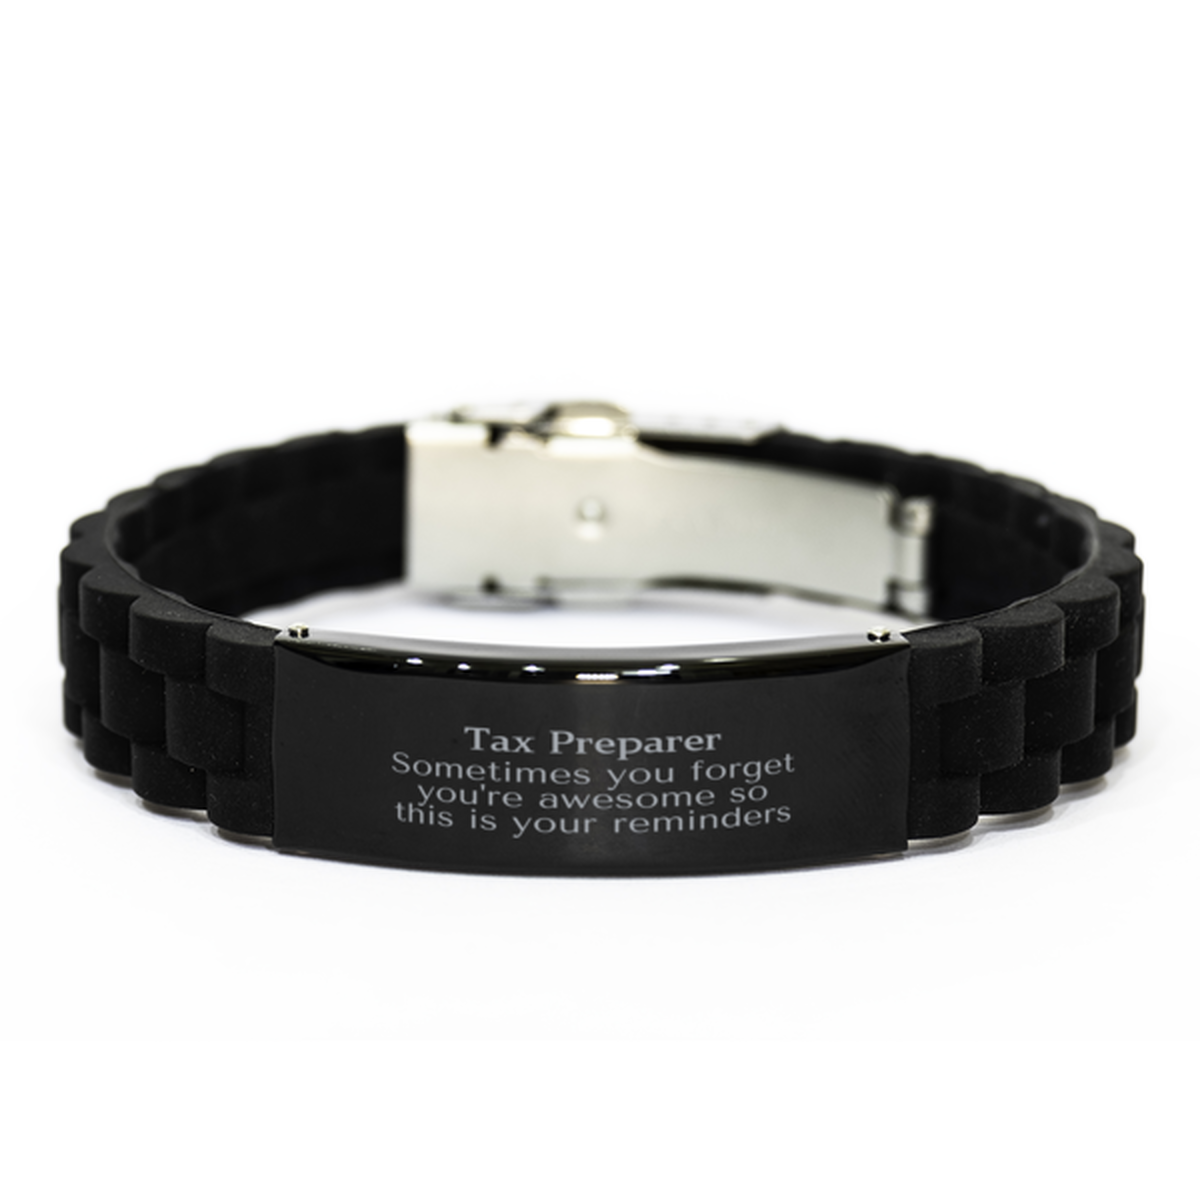 Sentimental Tax Preparer Black Glidelock Clasp Bracelet, Tax Preparer Sometimes you forget you're awesome so this is your reminders, Graduation Christmas Birthday Gifts for Tax Preparer, Men, Women, Coworkers